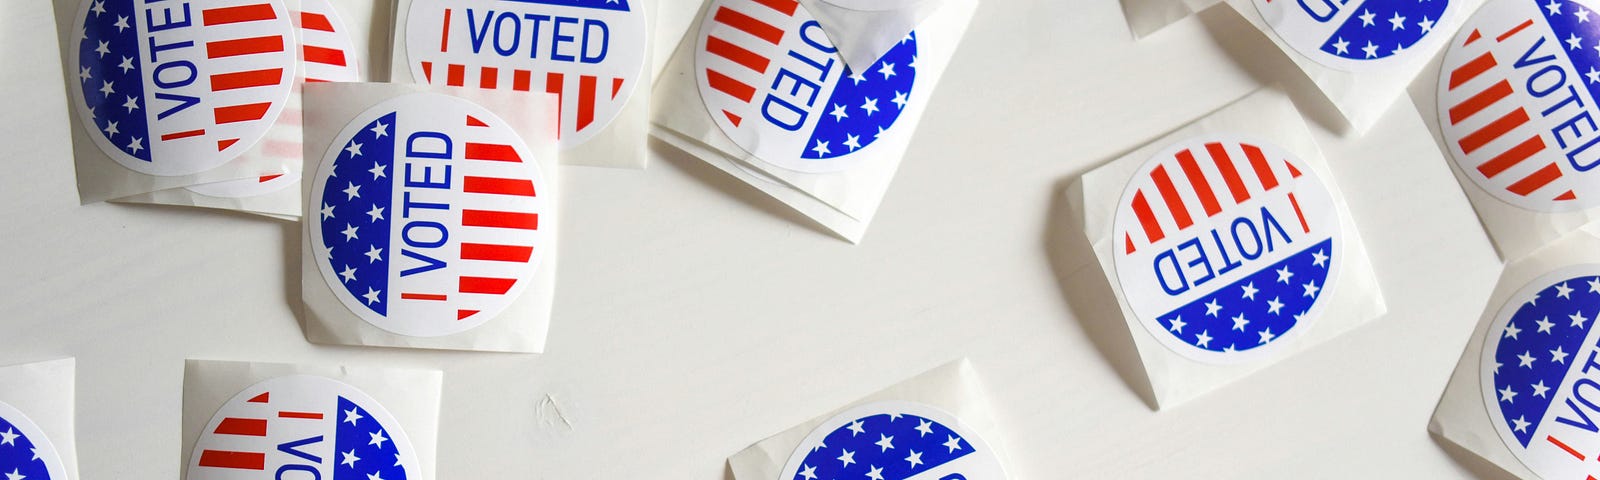 Photo of a bunch of “I voted” stickers